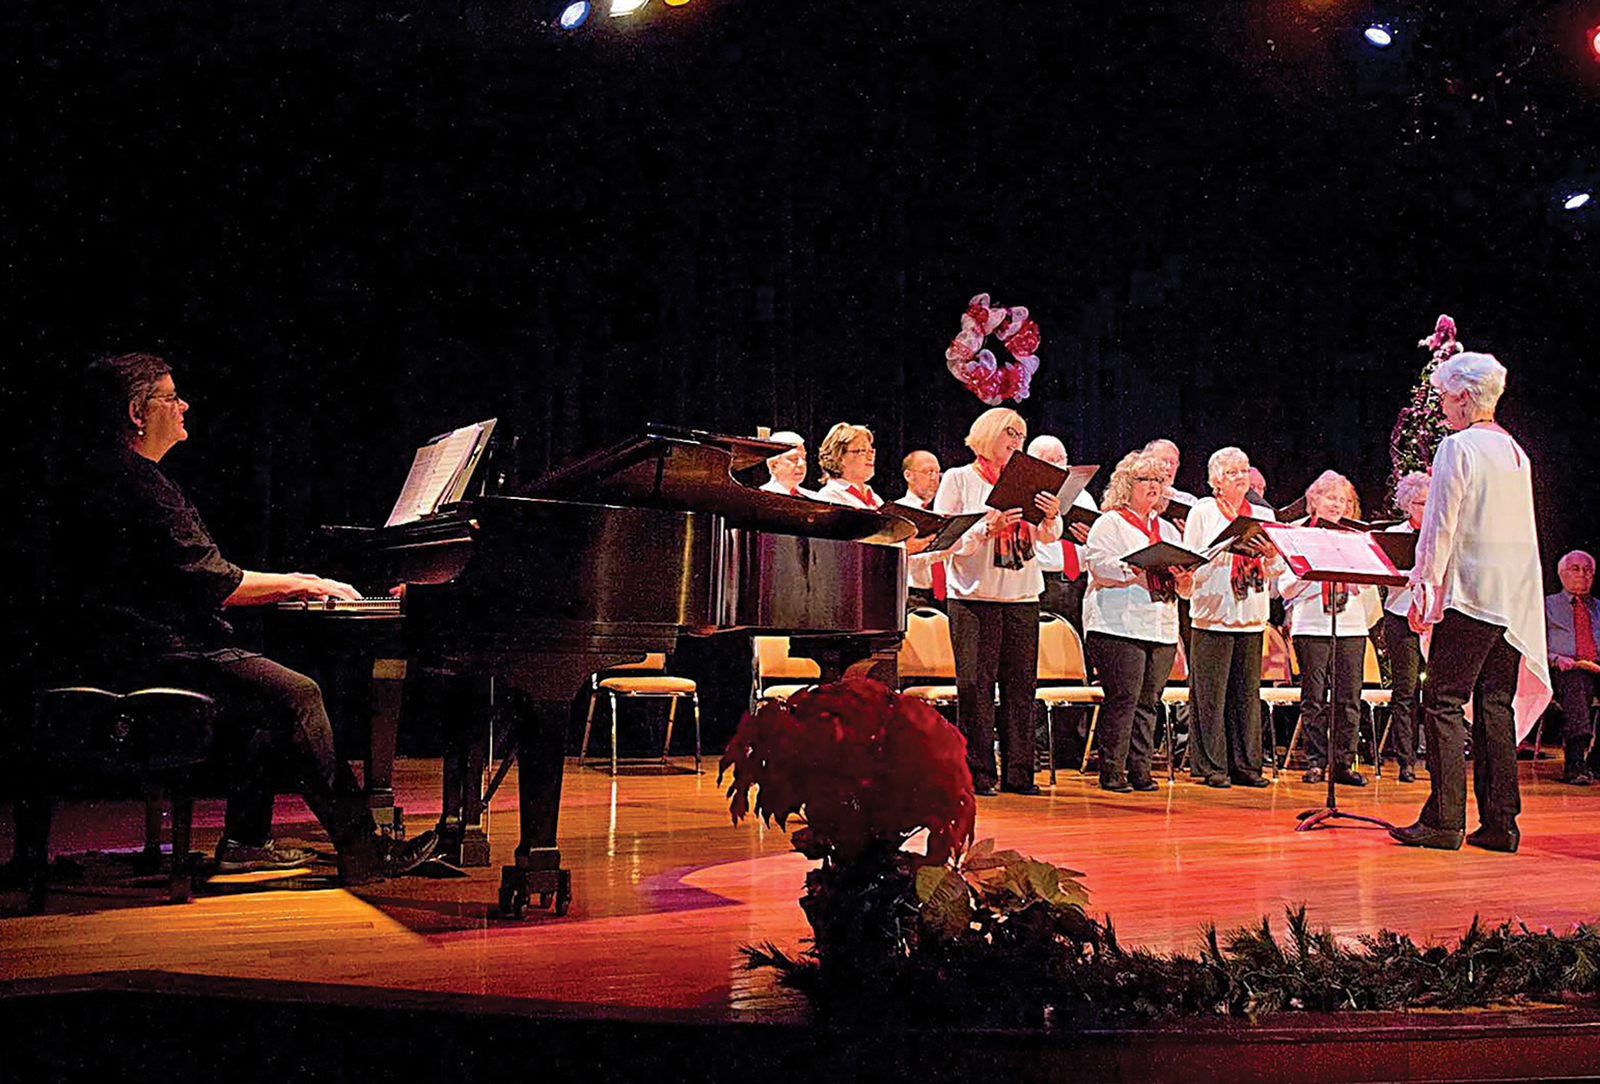 highlands nc highlands cashiers players holiday performance